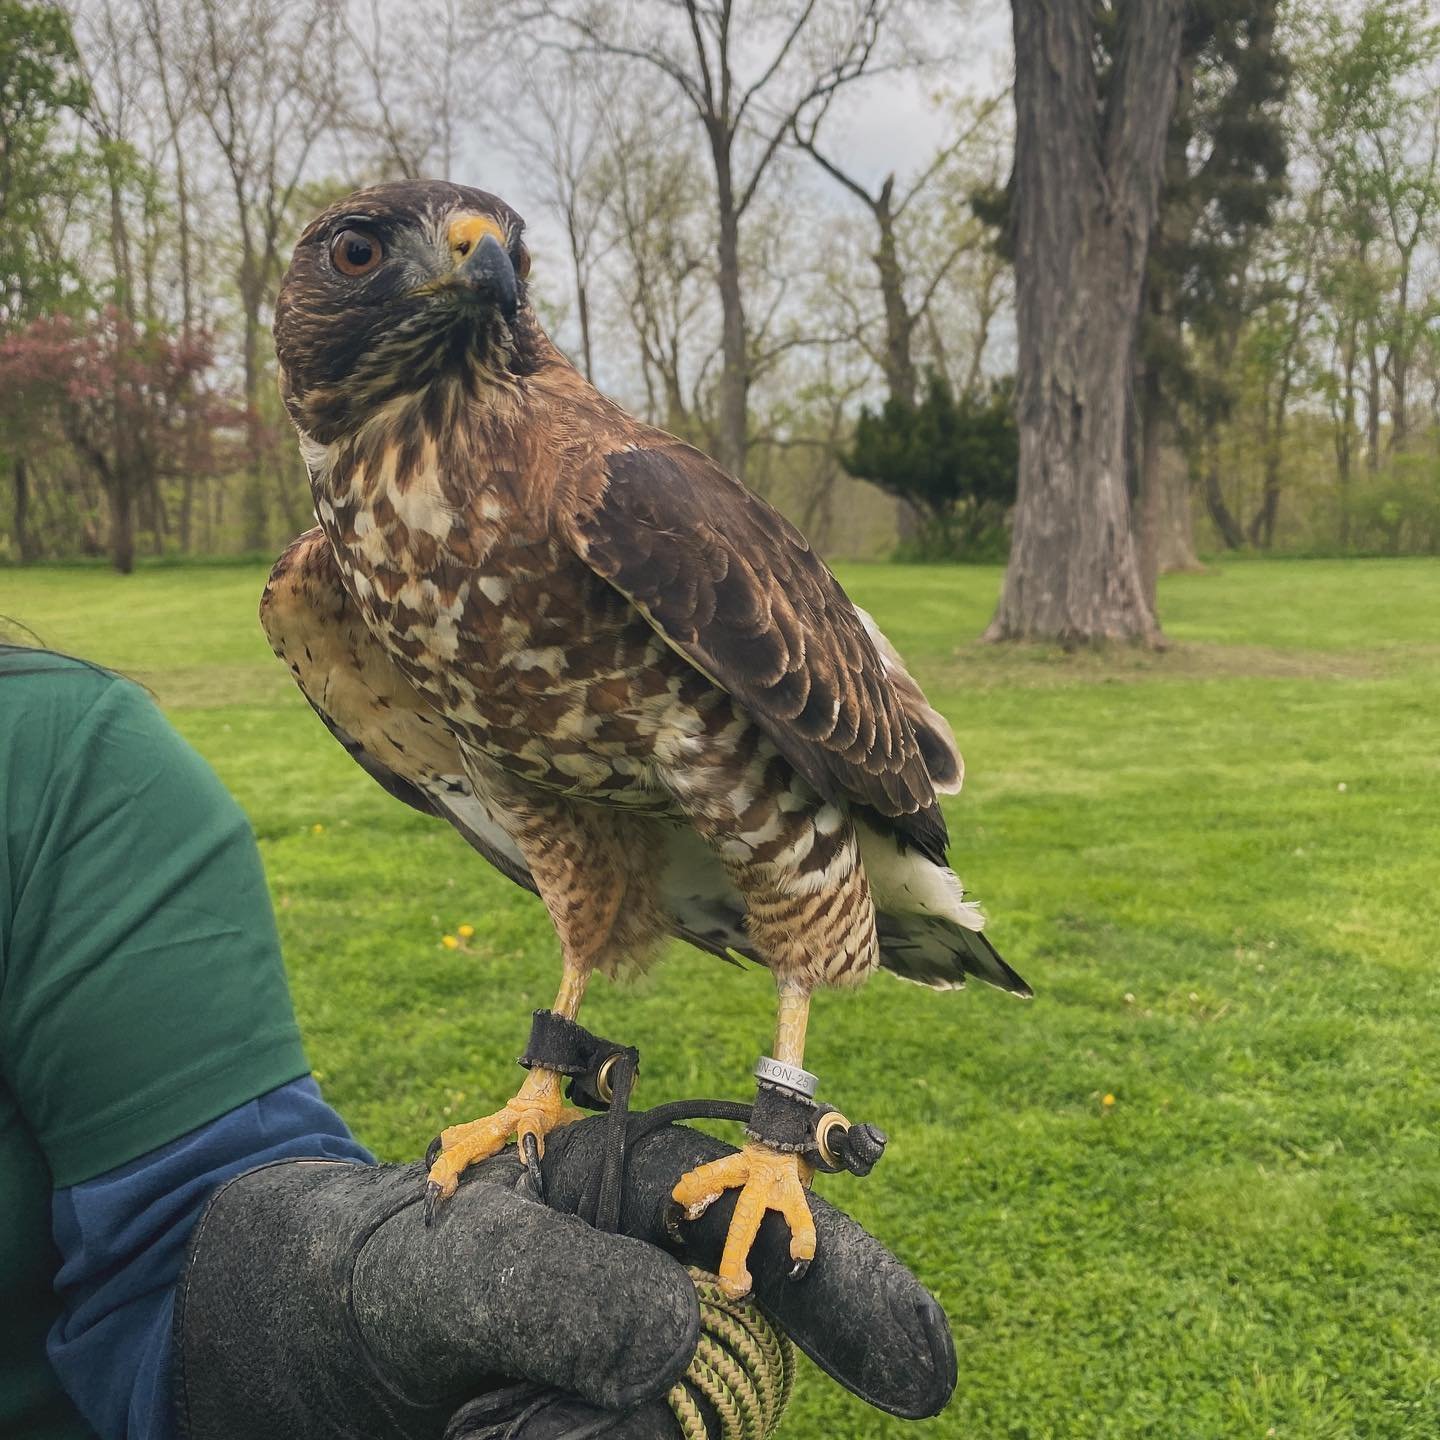 Thank you to everyone who participated in Ruthven Park&rsquo;s For the Birds Festival! We had a fun filled day of hikes, rooftop birdwatching, delicious food from @shellysfamilydining , banding demonstrations, Raptor shows with @wild_ontario and more